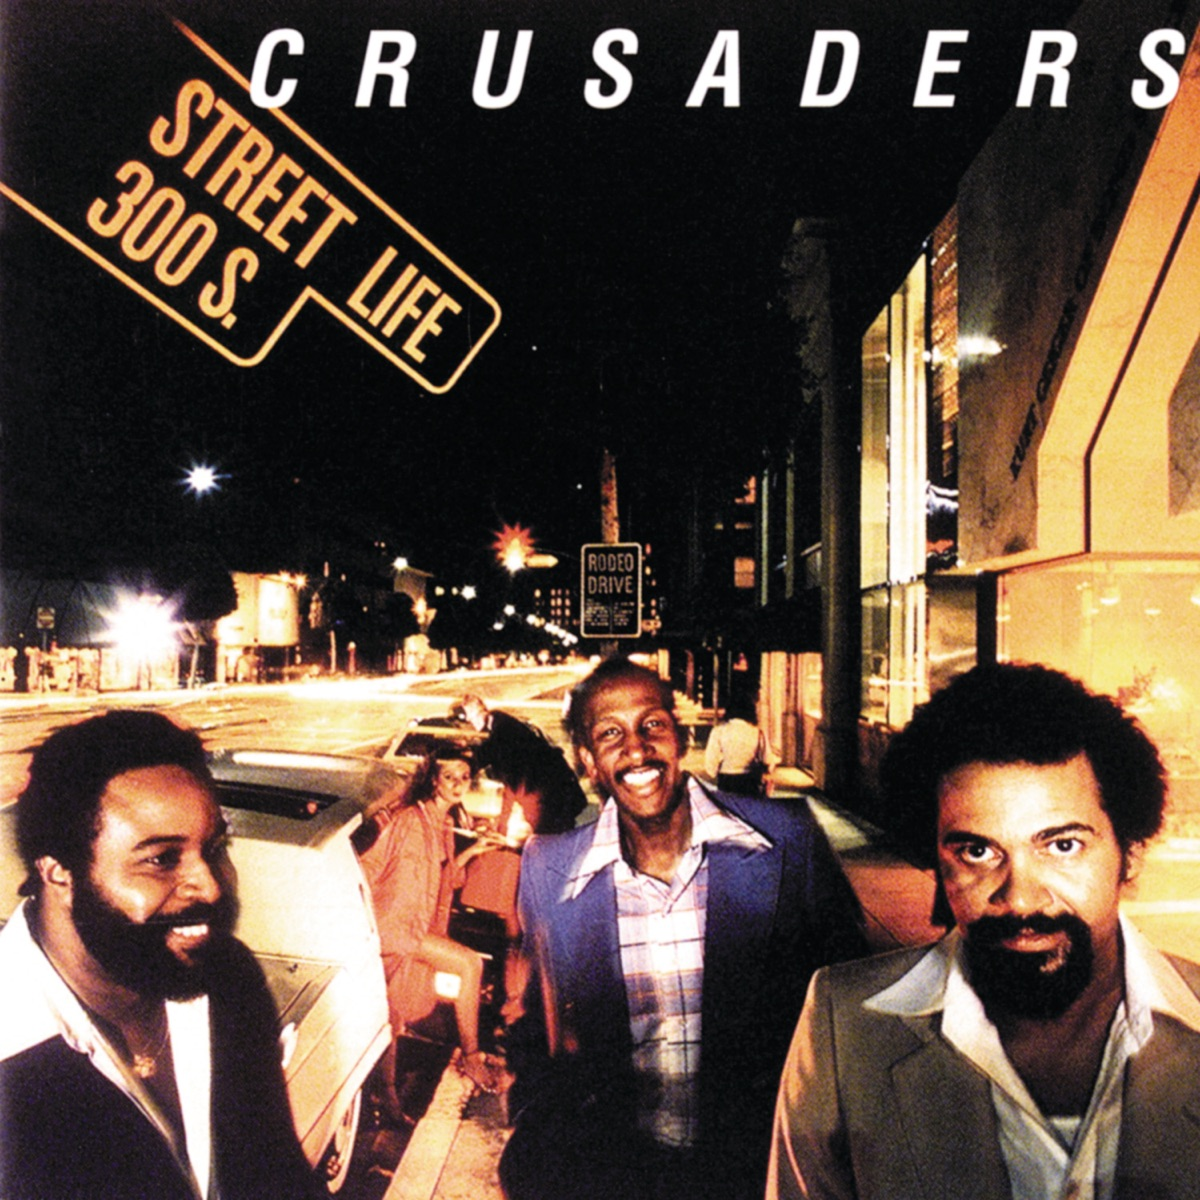 Art for Street Life by The Crusaders